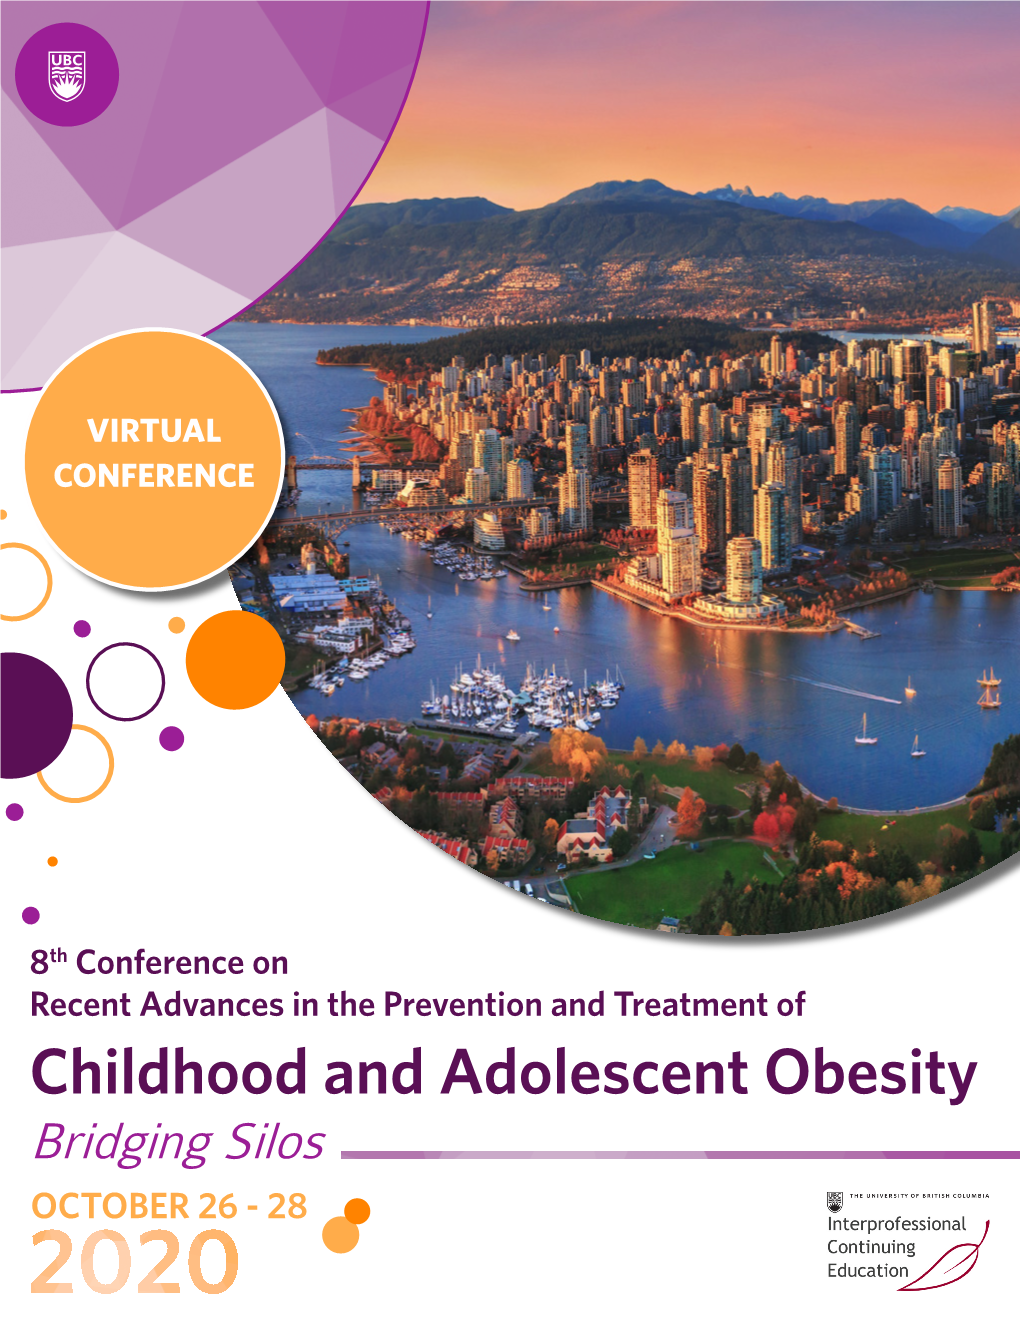 OCTOBER 26 - 28 8Th Conference on Recent Advances in the Prevention and Treatment of Childhood and Adolescent Obesity GENERAL INFORMATION & REGISTRATION